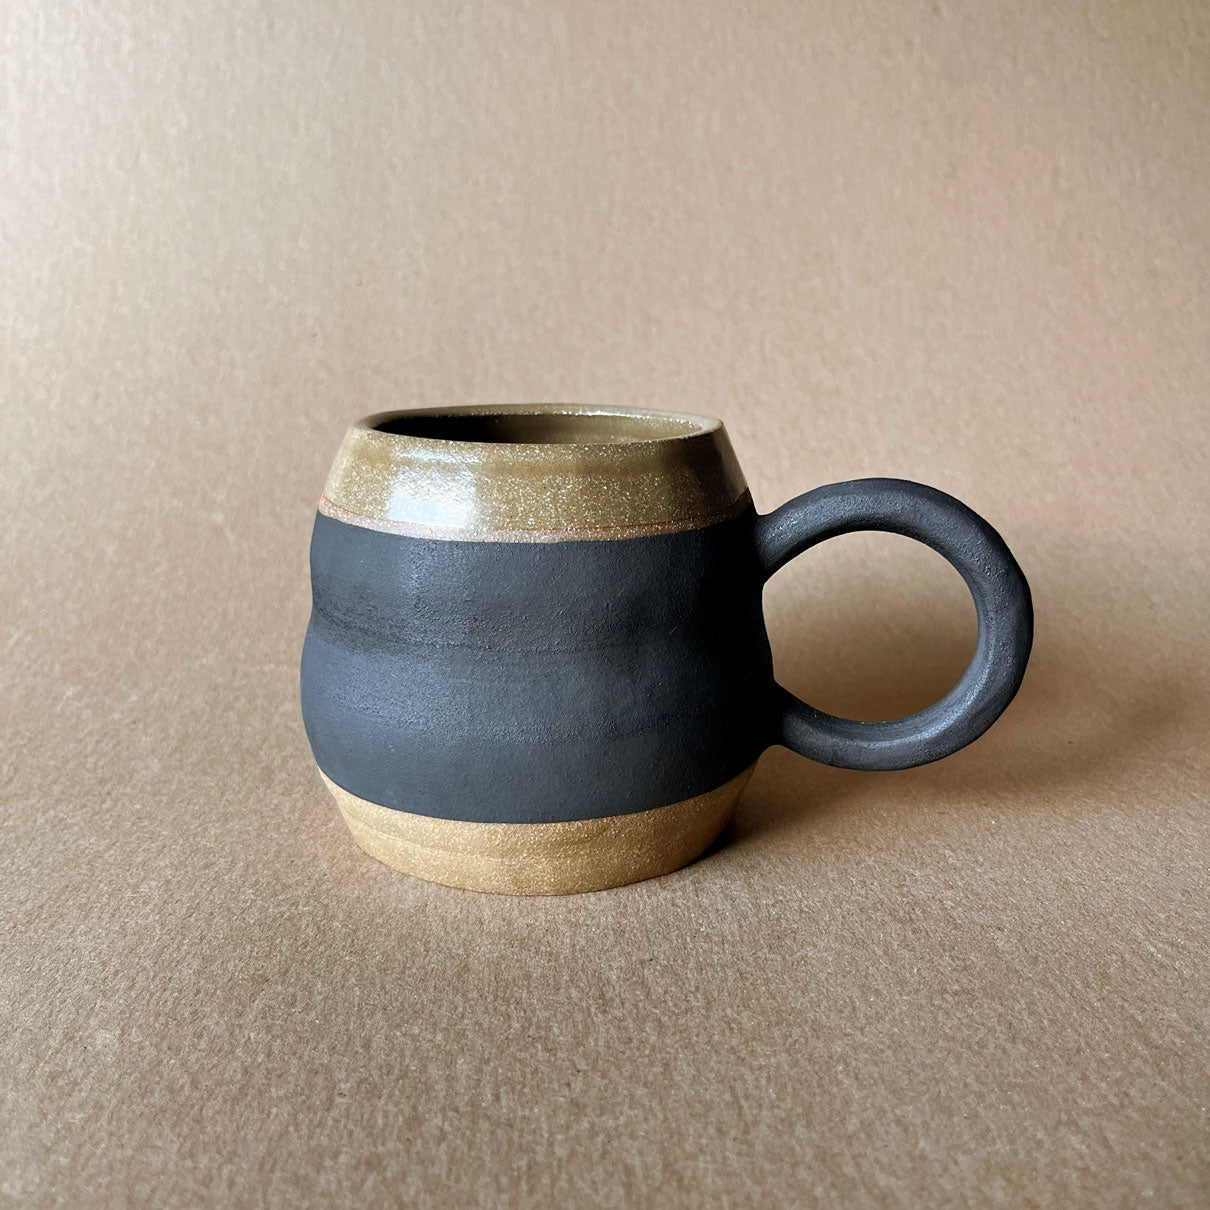 An elegant billowing body form in brown stoneware, featuring a hammered raw texture. Black underglazed exterior that has a volcanic rock texture, with a clear glazed lip and interior. 